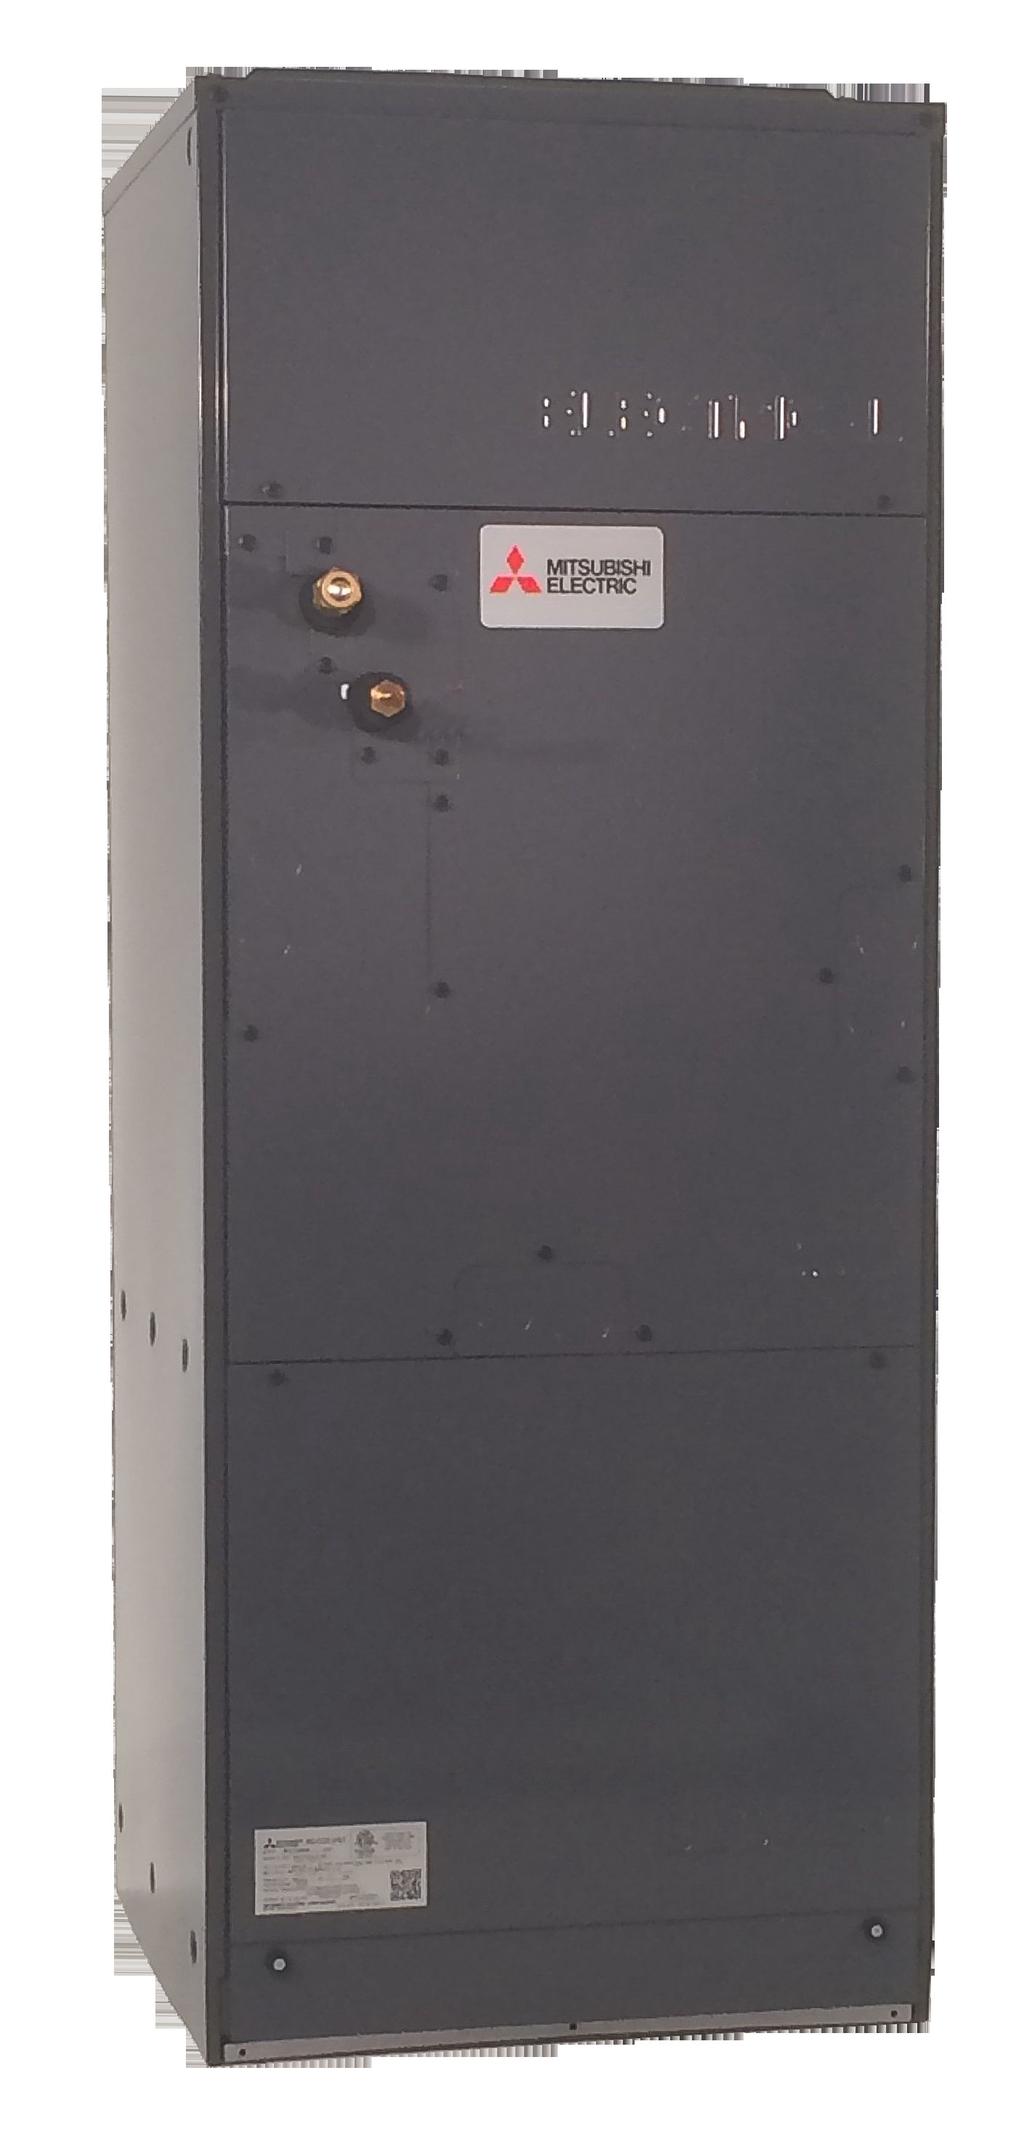 P-SERIES SUBMITTAL DATA: & 36,000 BTU/H AIR HANDLER HEAT PUMP SYSTEM Job Name: System Reference: Date: : : INDOOR UNIT FEATURES Ducted air handler provides a solution to cool and heat large zones